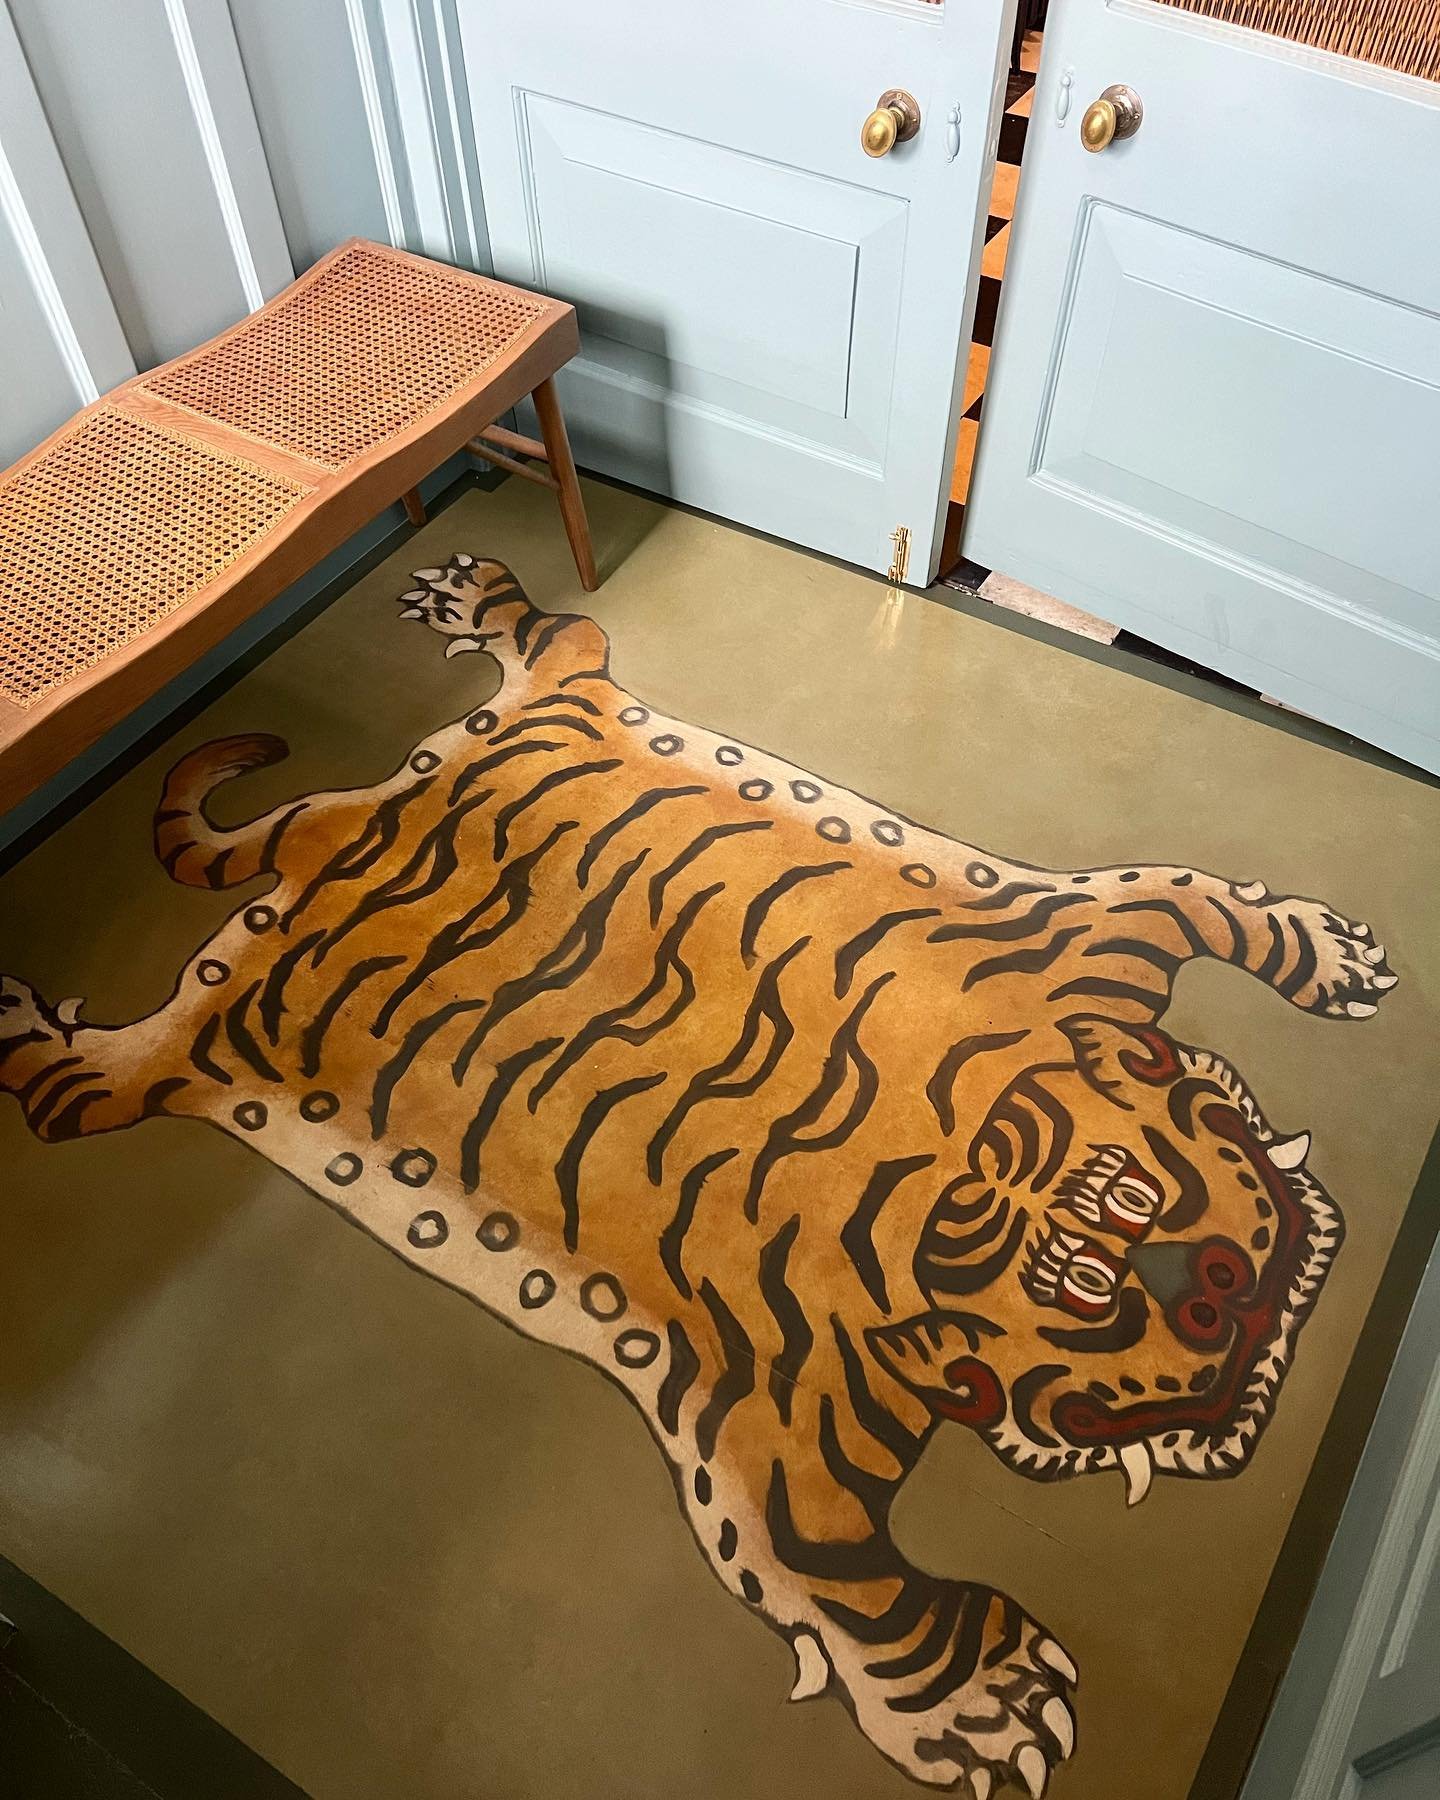 When a rug won&rsquo;t work.. paint it instead! 

(Very much inspired by my favourite @houseofhackney Sabre rug) 

#tibetantigerrug #floormural #tibetantiger #handpainted #specialistpainting #decorativepainting #handpaintedfloor #houseofhackney